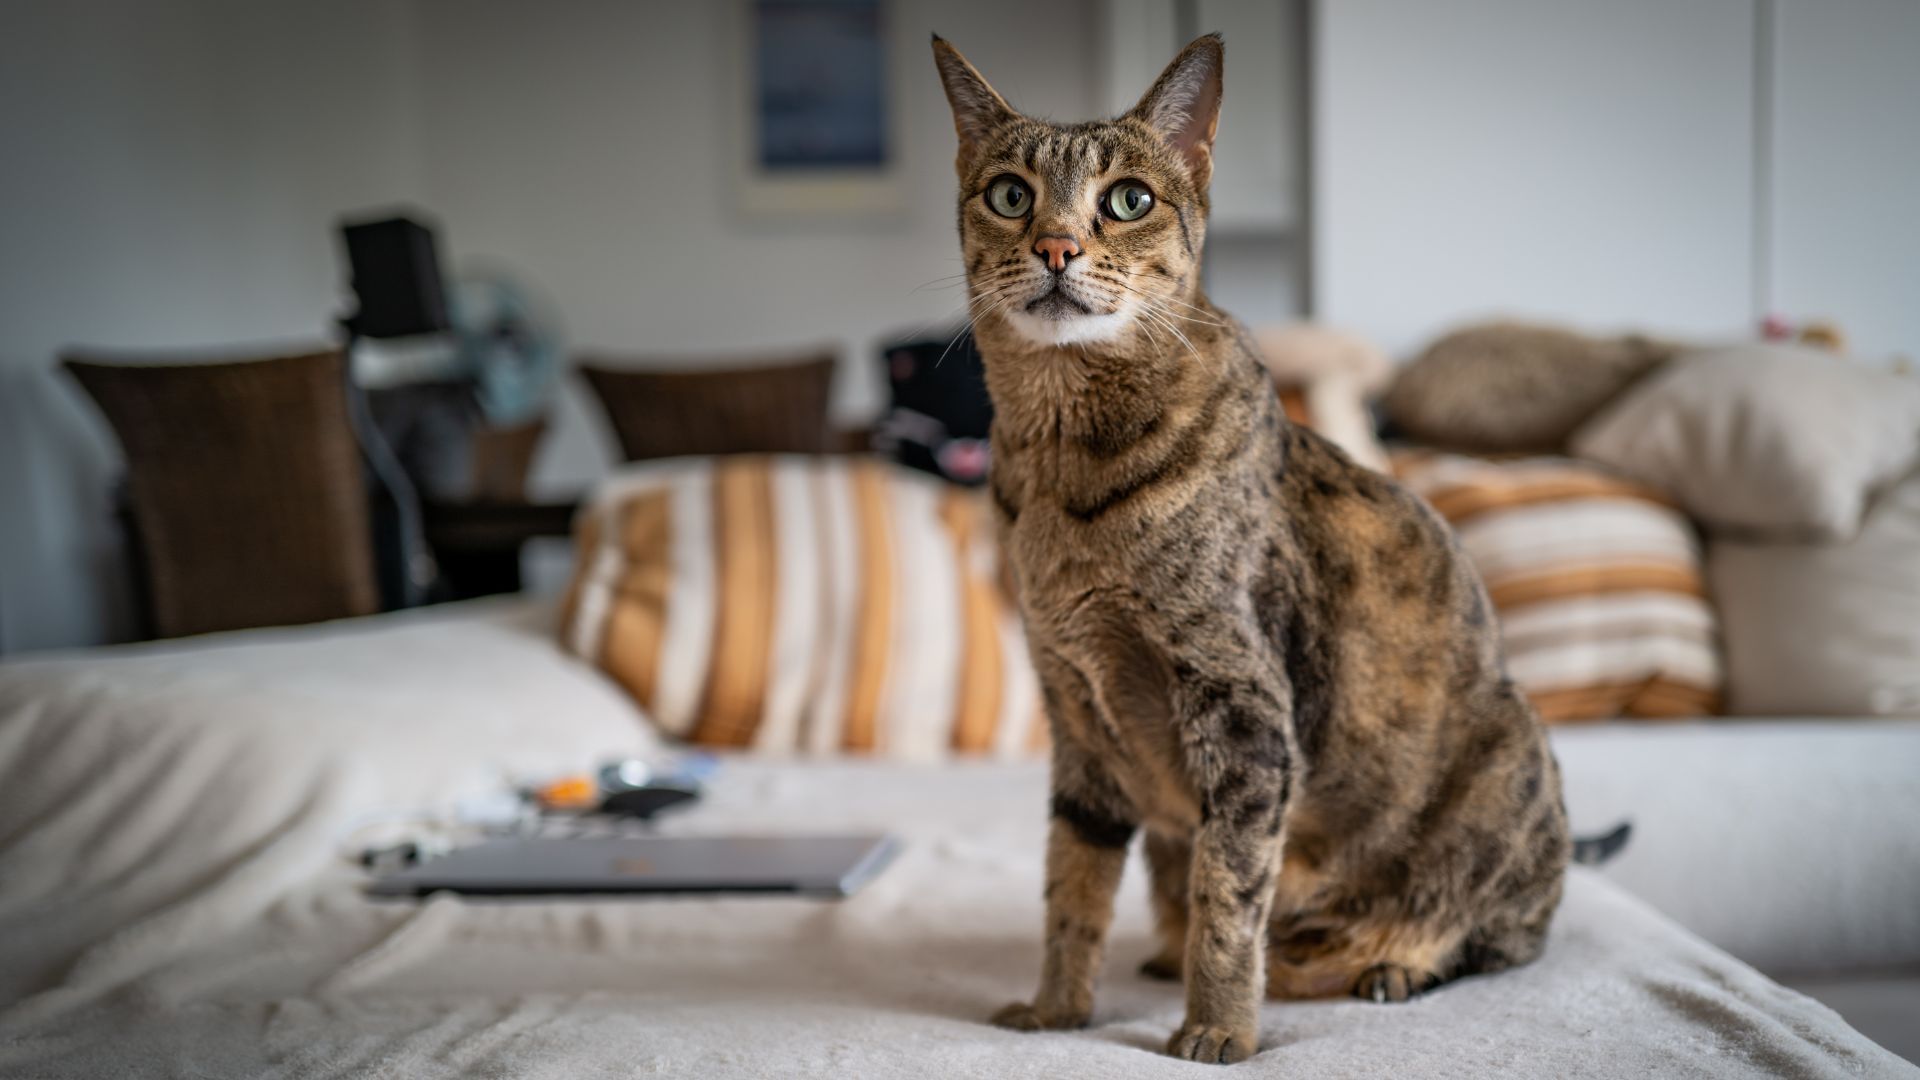 <p>                     Known as the largest domestic feline, the Savannah cat could be the exotic pet your home has been missing. It’s a hybrid between a wild African cat and a domestic kitten. But do note: there are bans against owning one as a pet in certain U.S. states.                   </p>